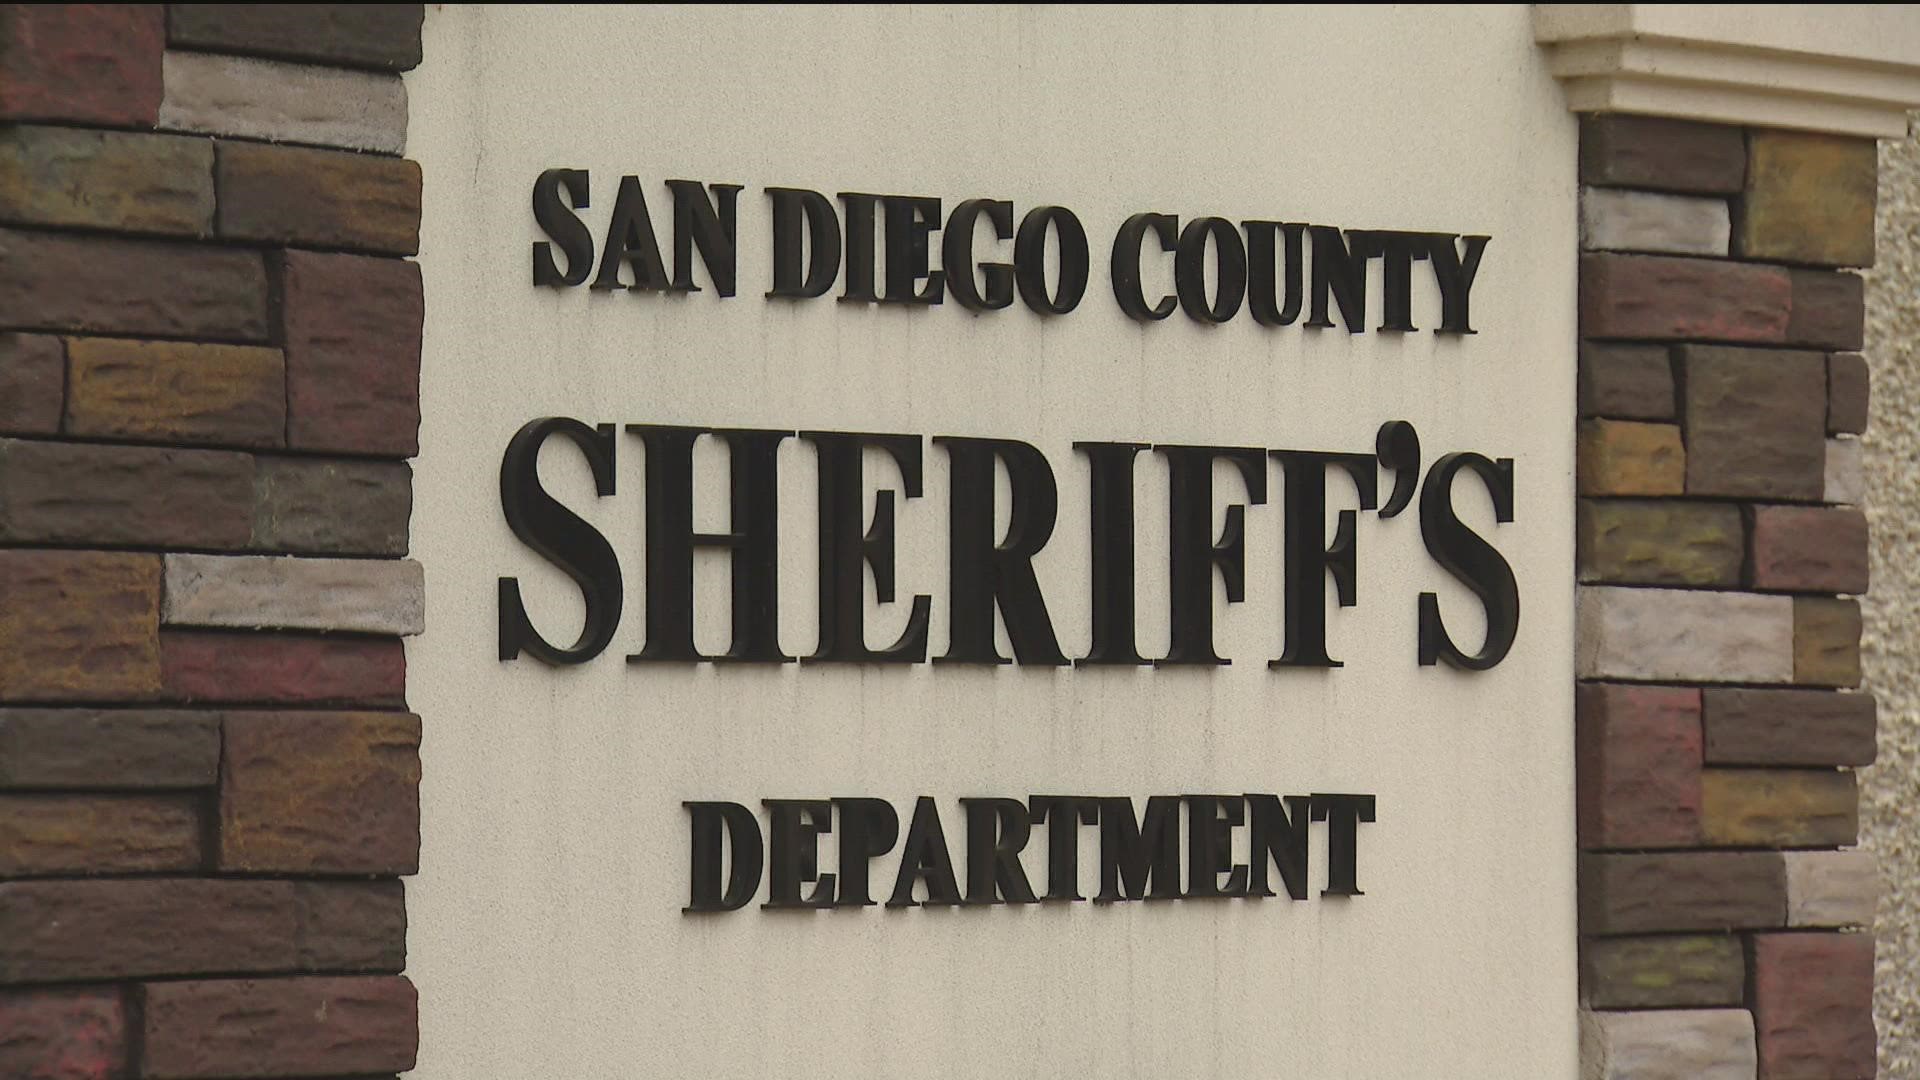 Two women claim they were regularly subjected to sexual harassment by one of their supervisors while working as detectives for the sheriff’s department.